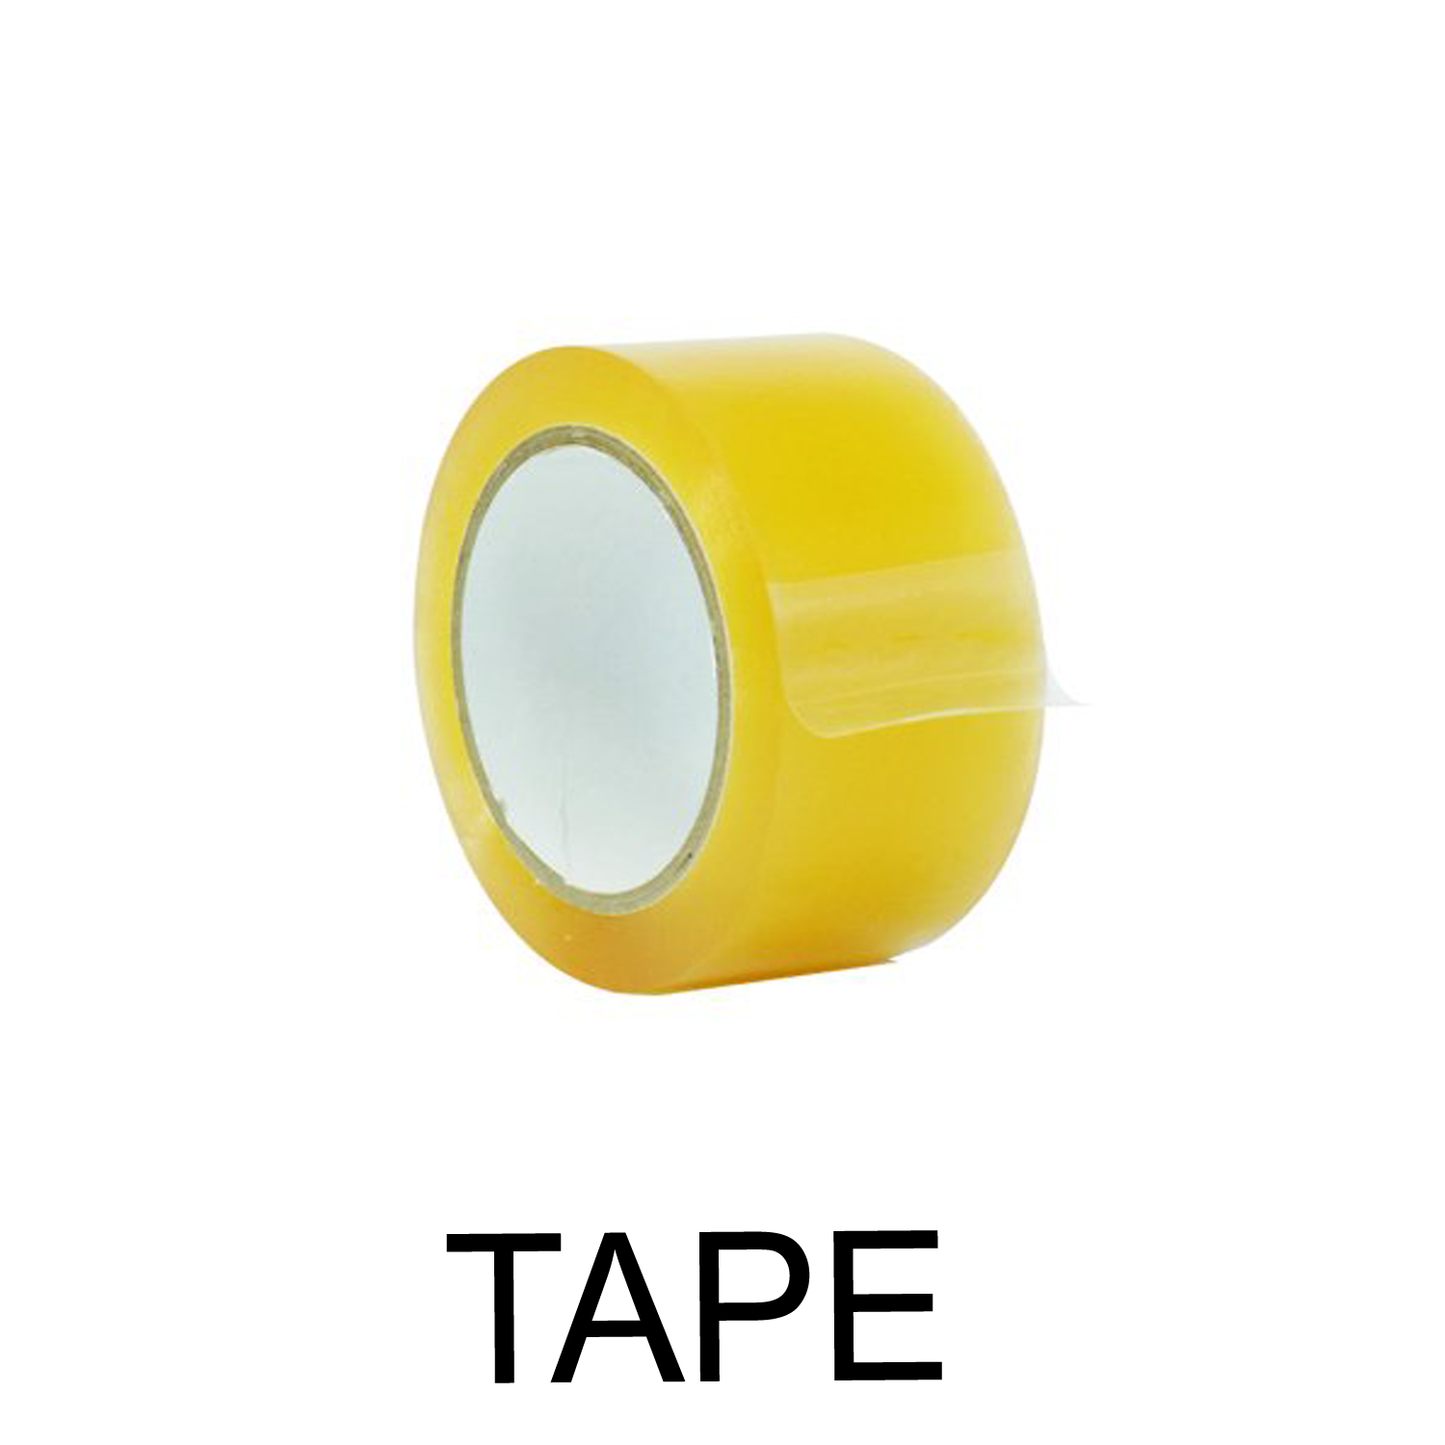 1 PC Clear Tape